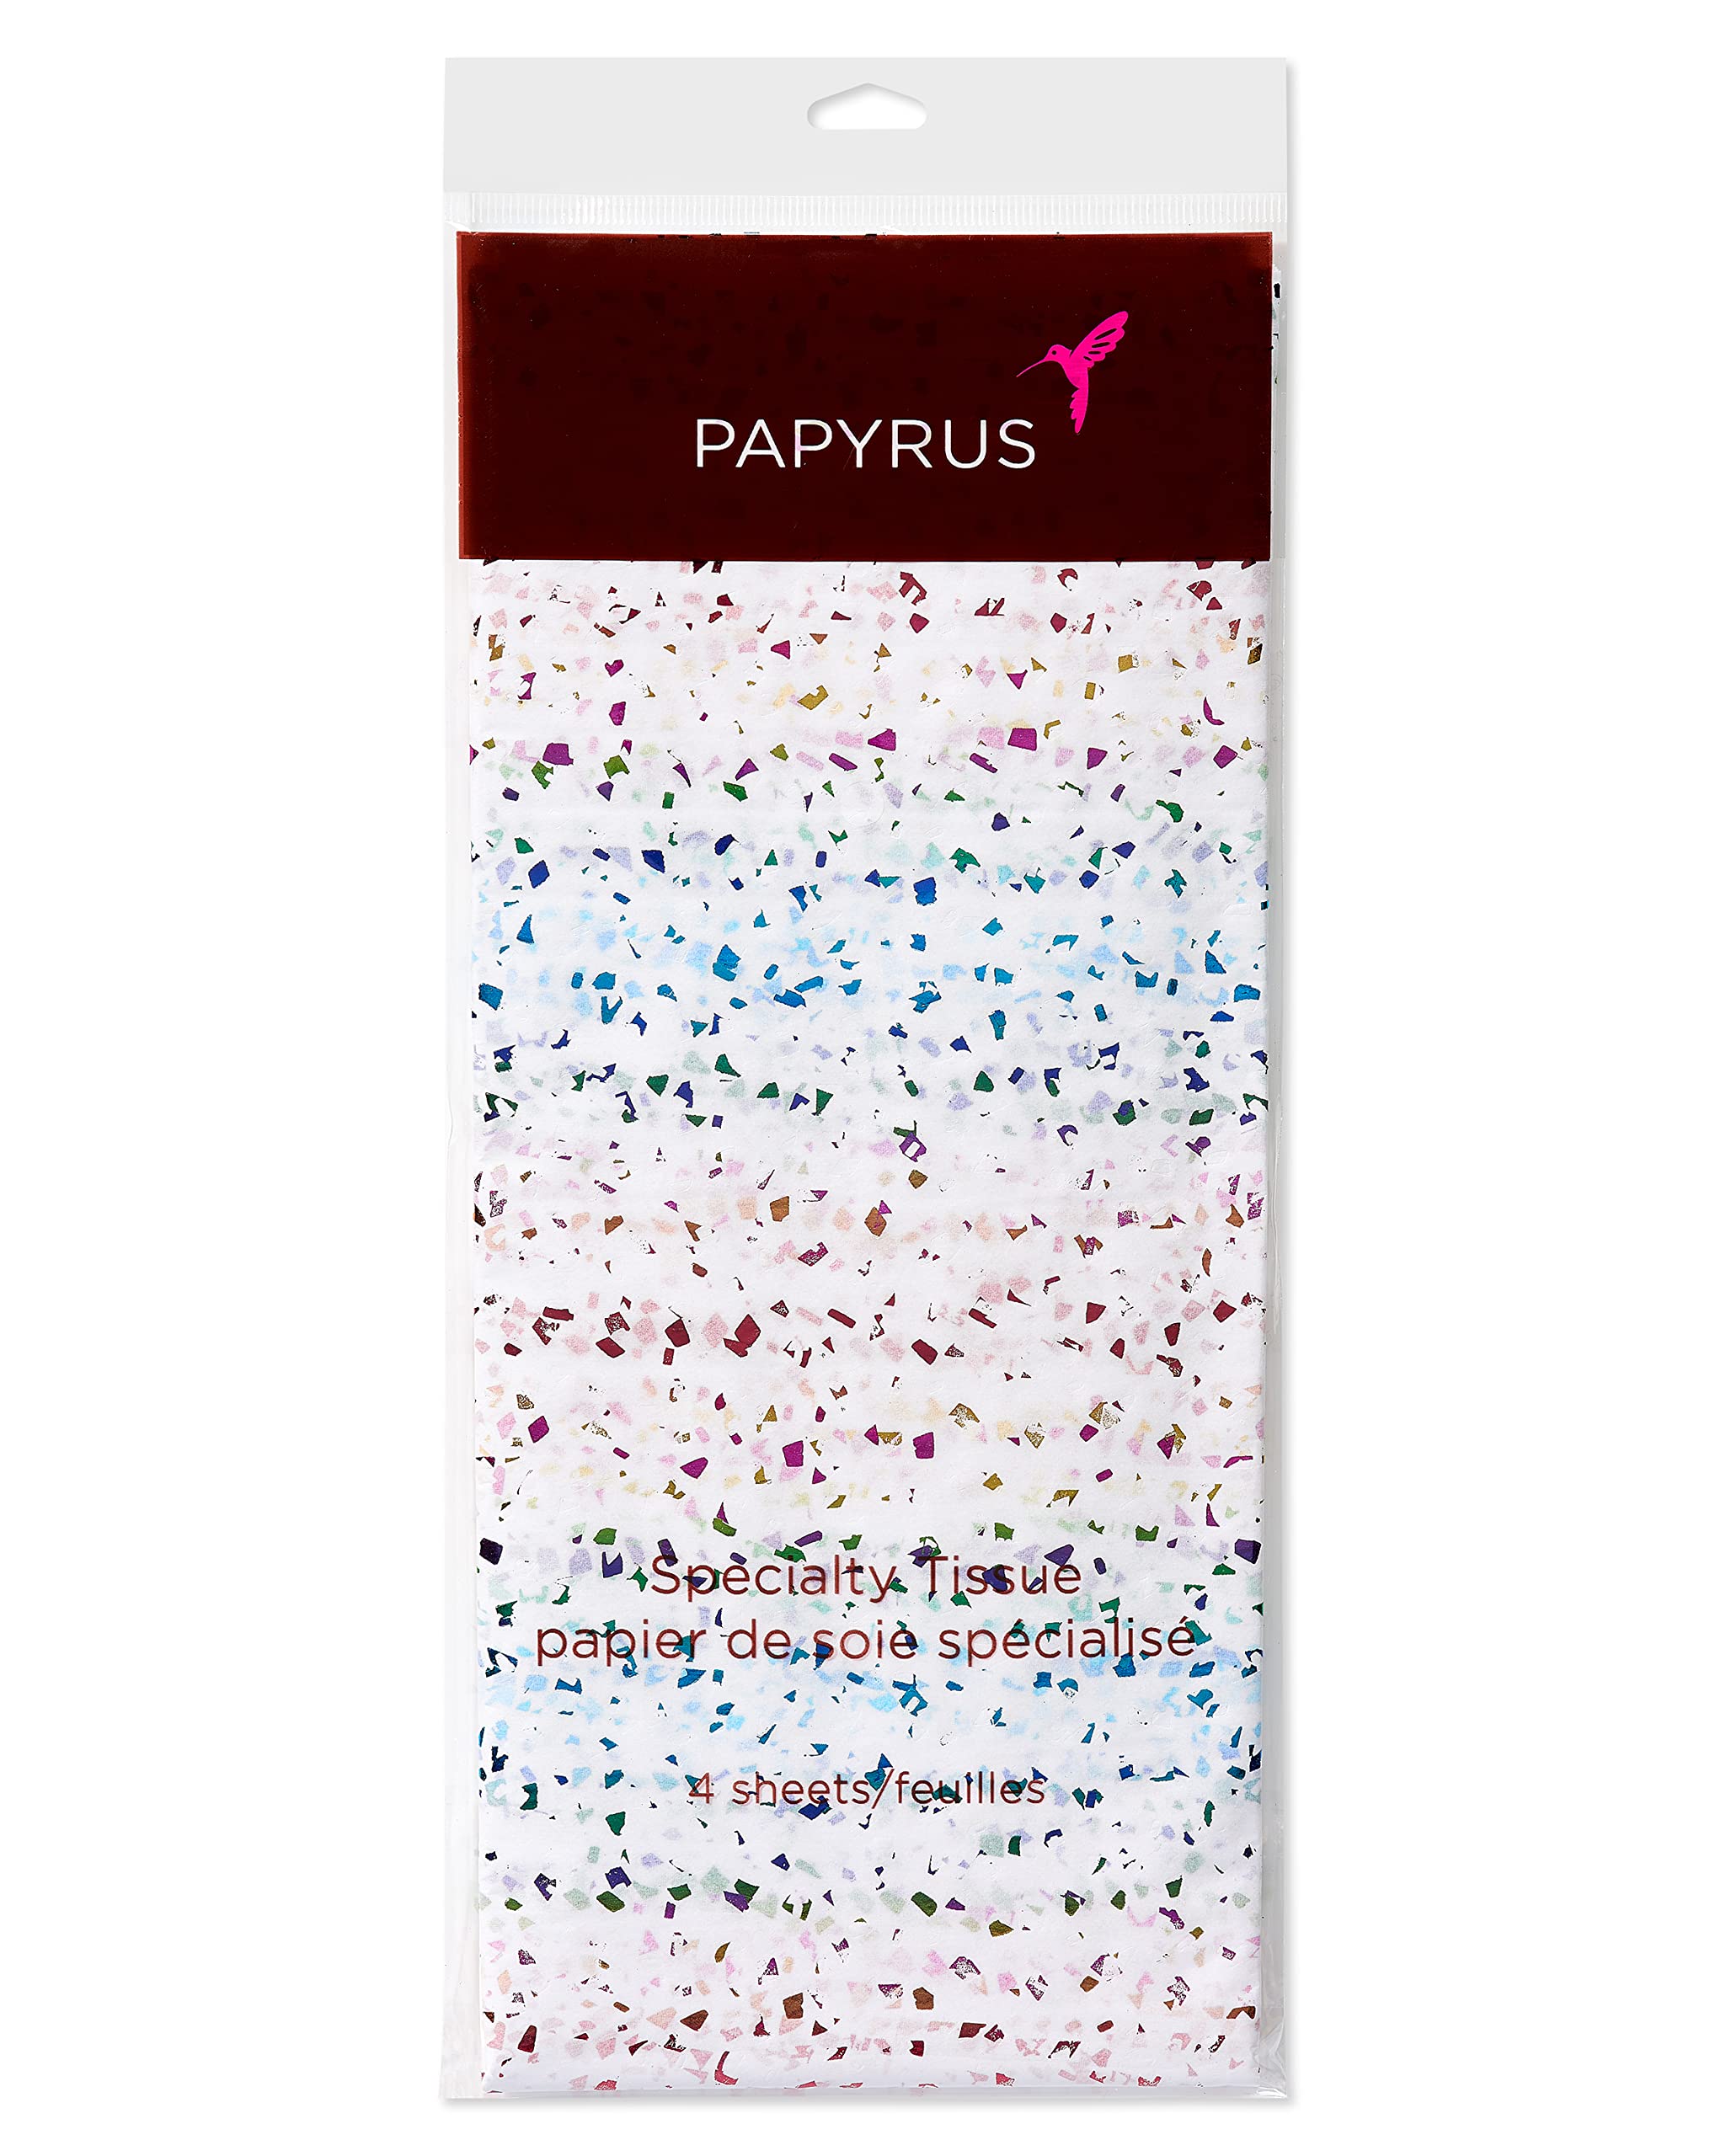 Papyrus 4 Sheet Rainbow Confetti Tissue Paper for Gifts, Decorations, Crafts, DIY and More